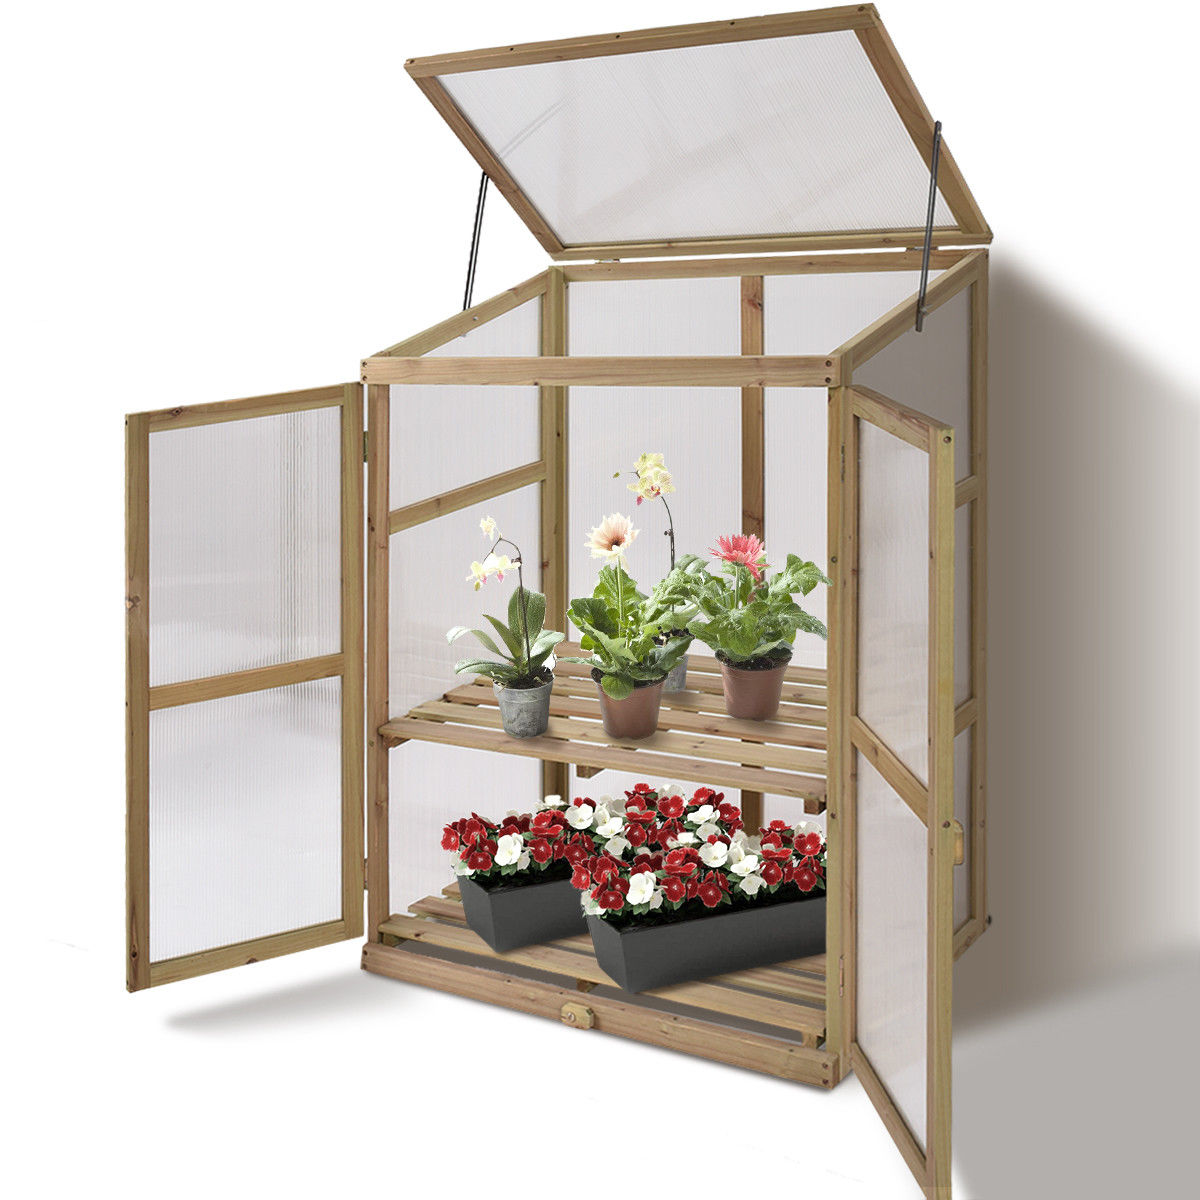 Costway Garden Portable Wooden GreenHouse Cold Frame Raised Plants Shelves